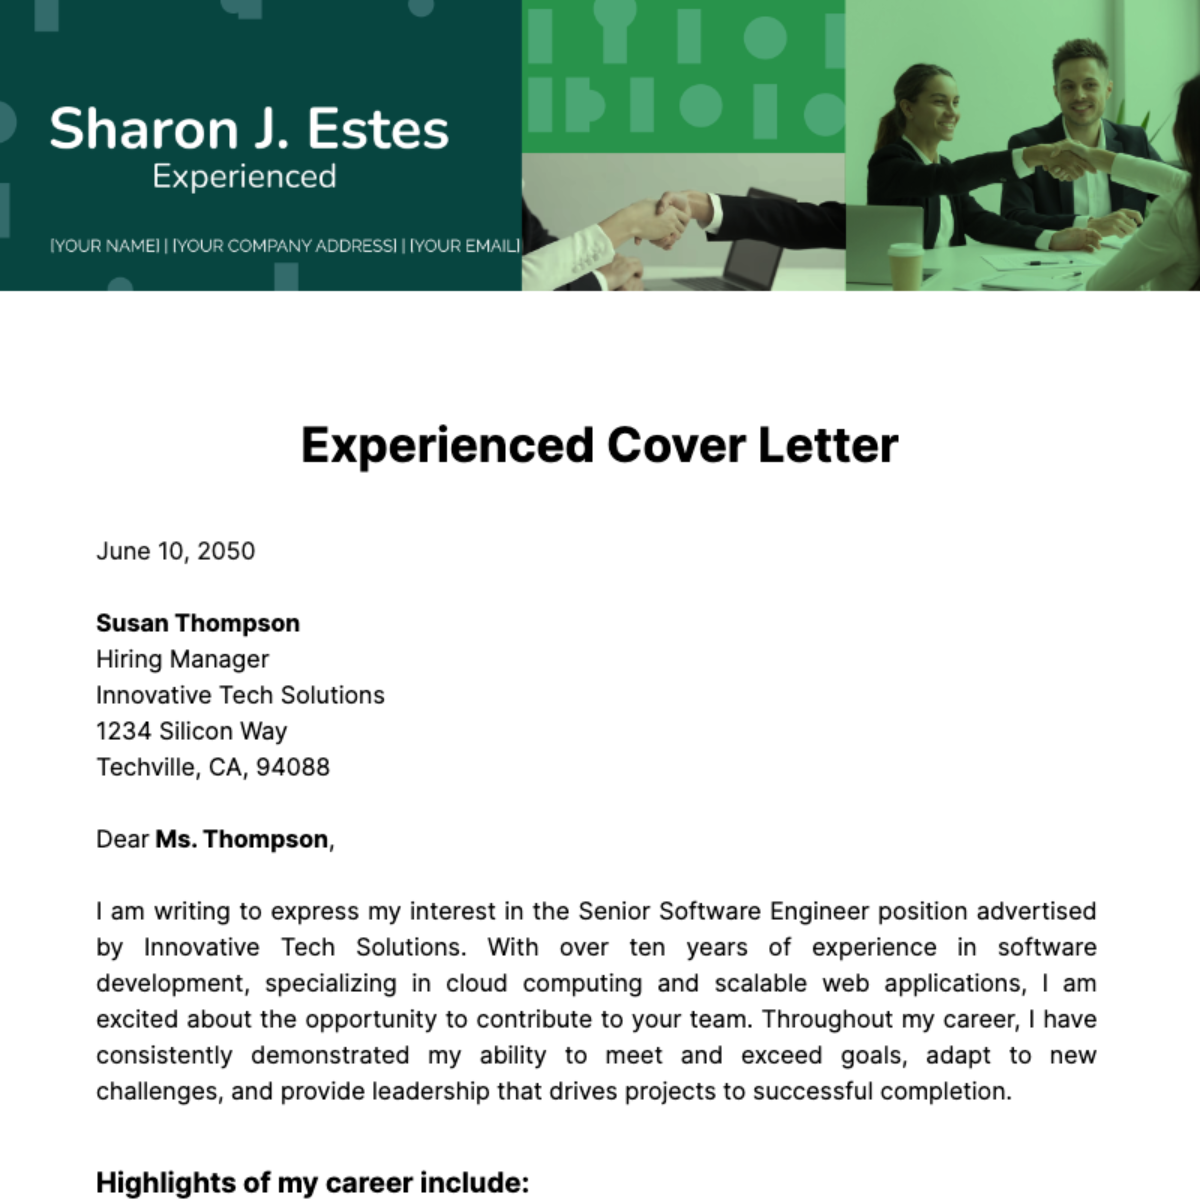 Experienced Cover Letter Template